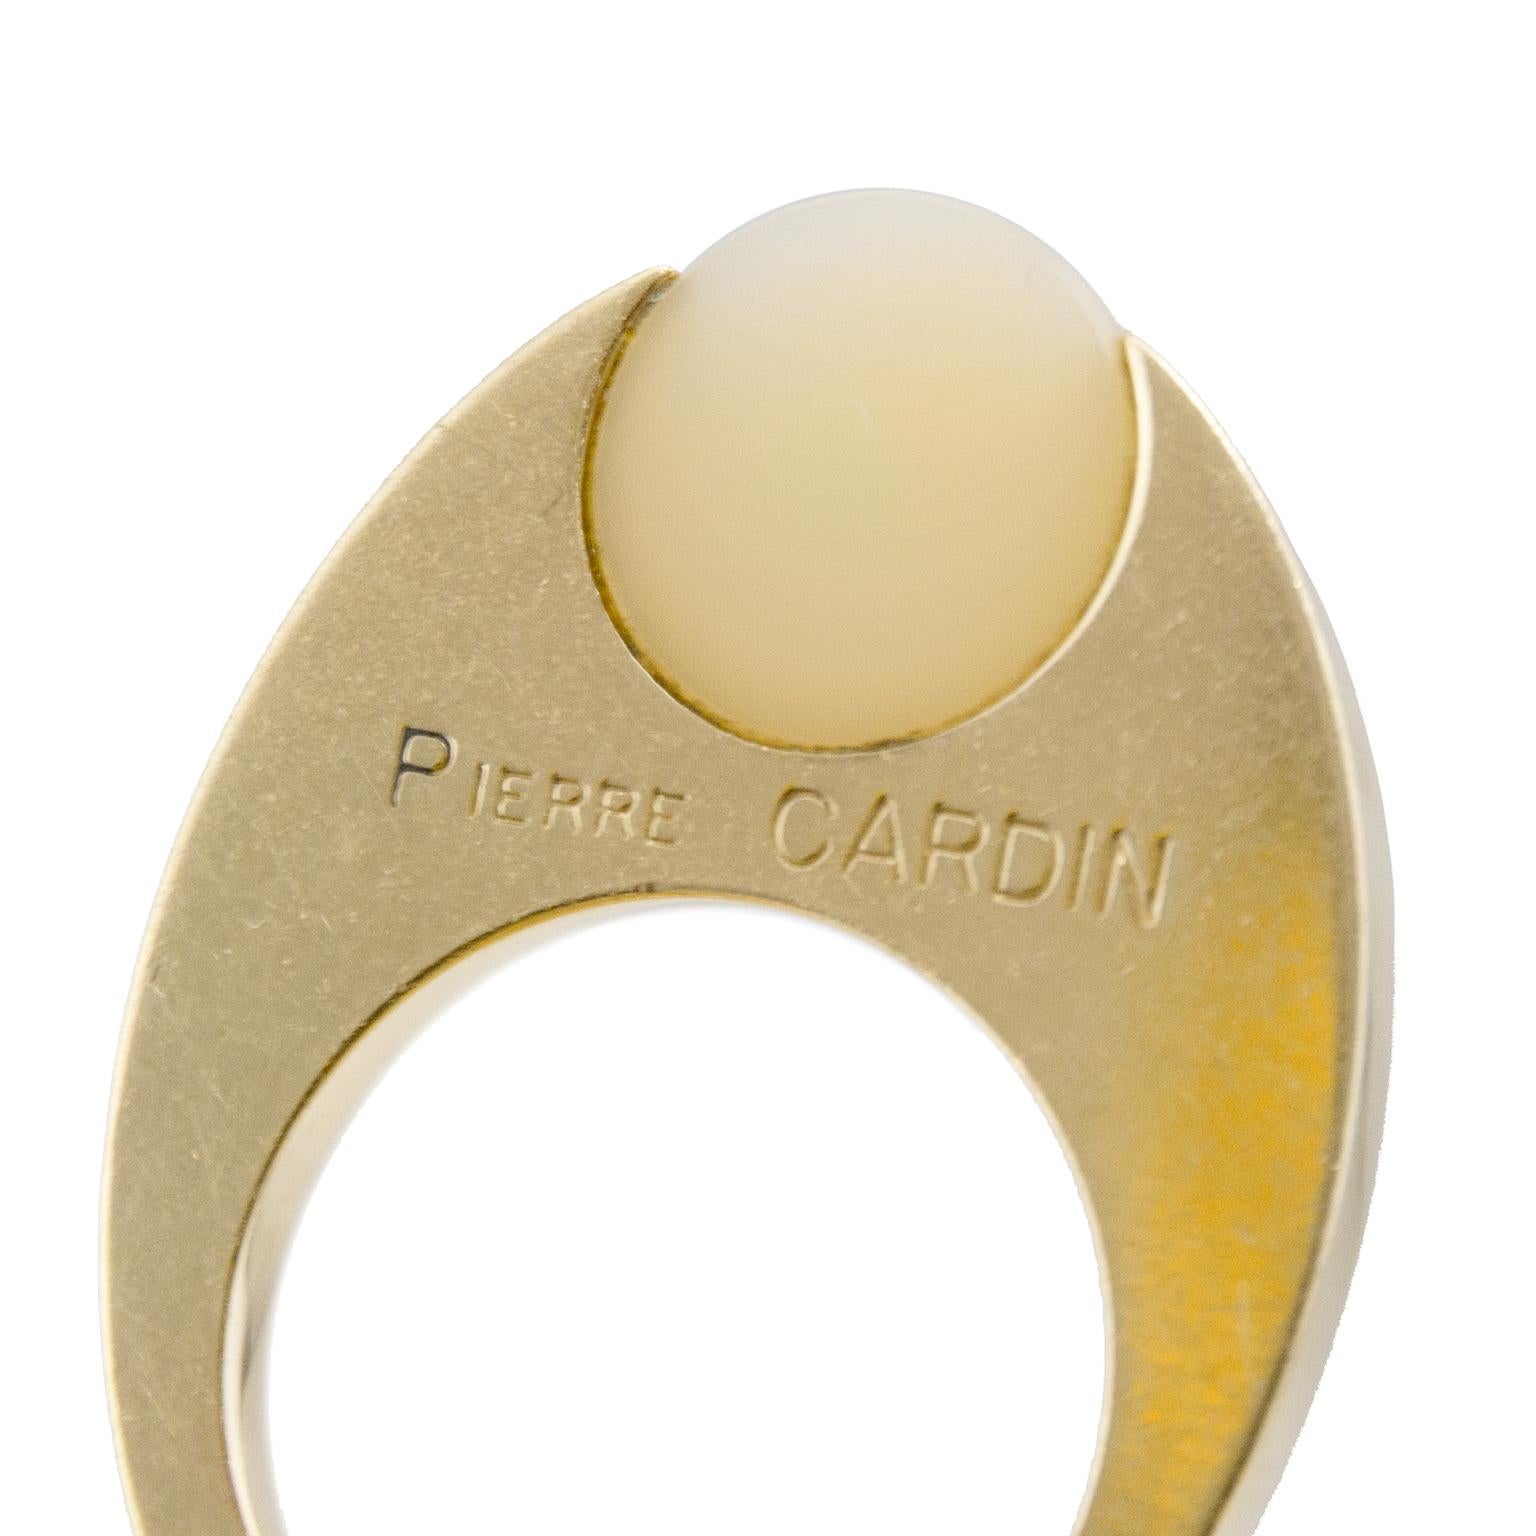 is pierre cardin jewellery worth anything